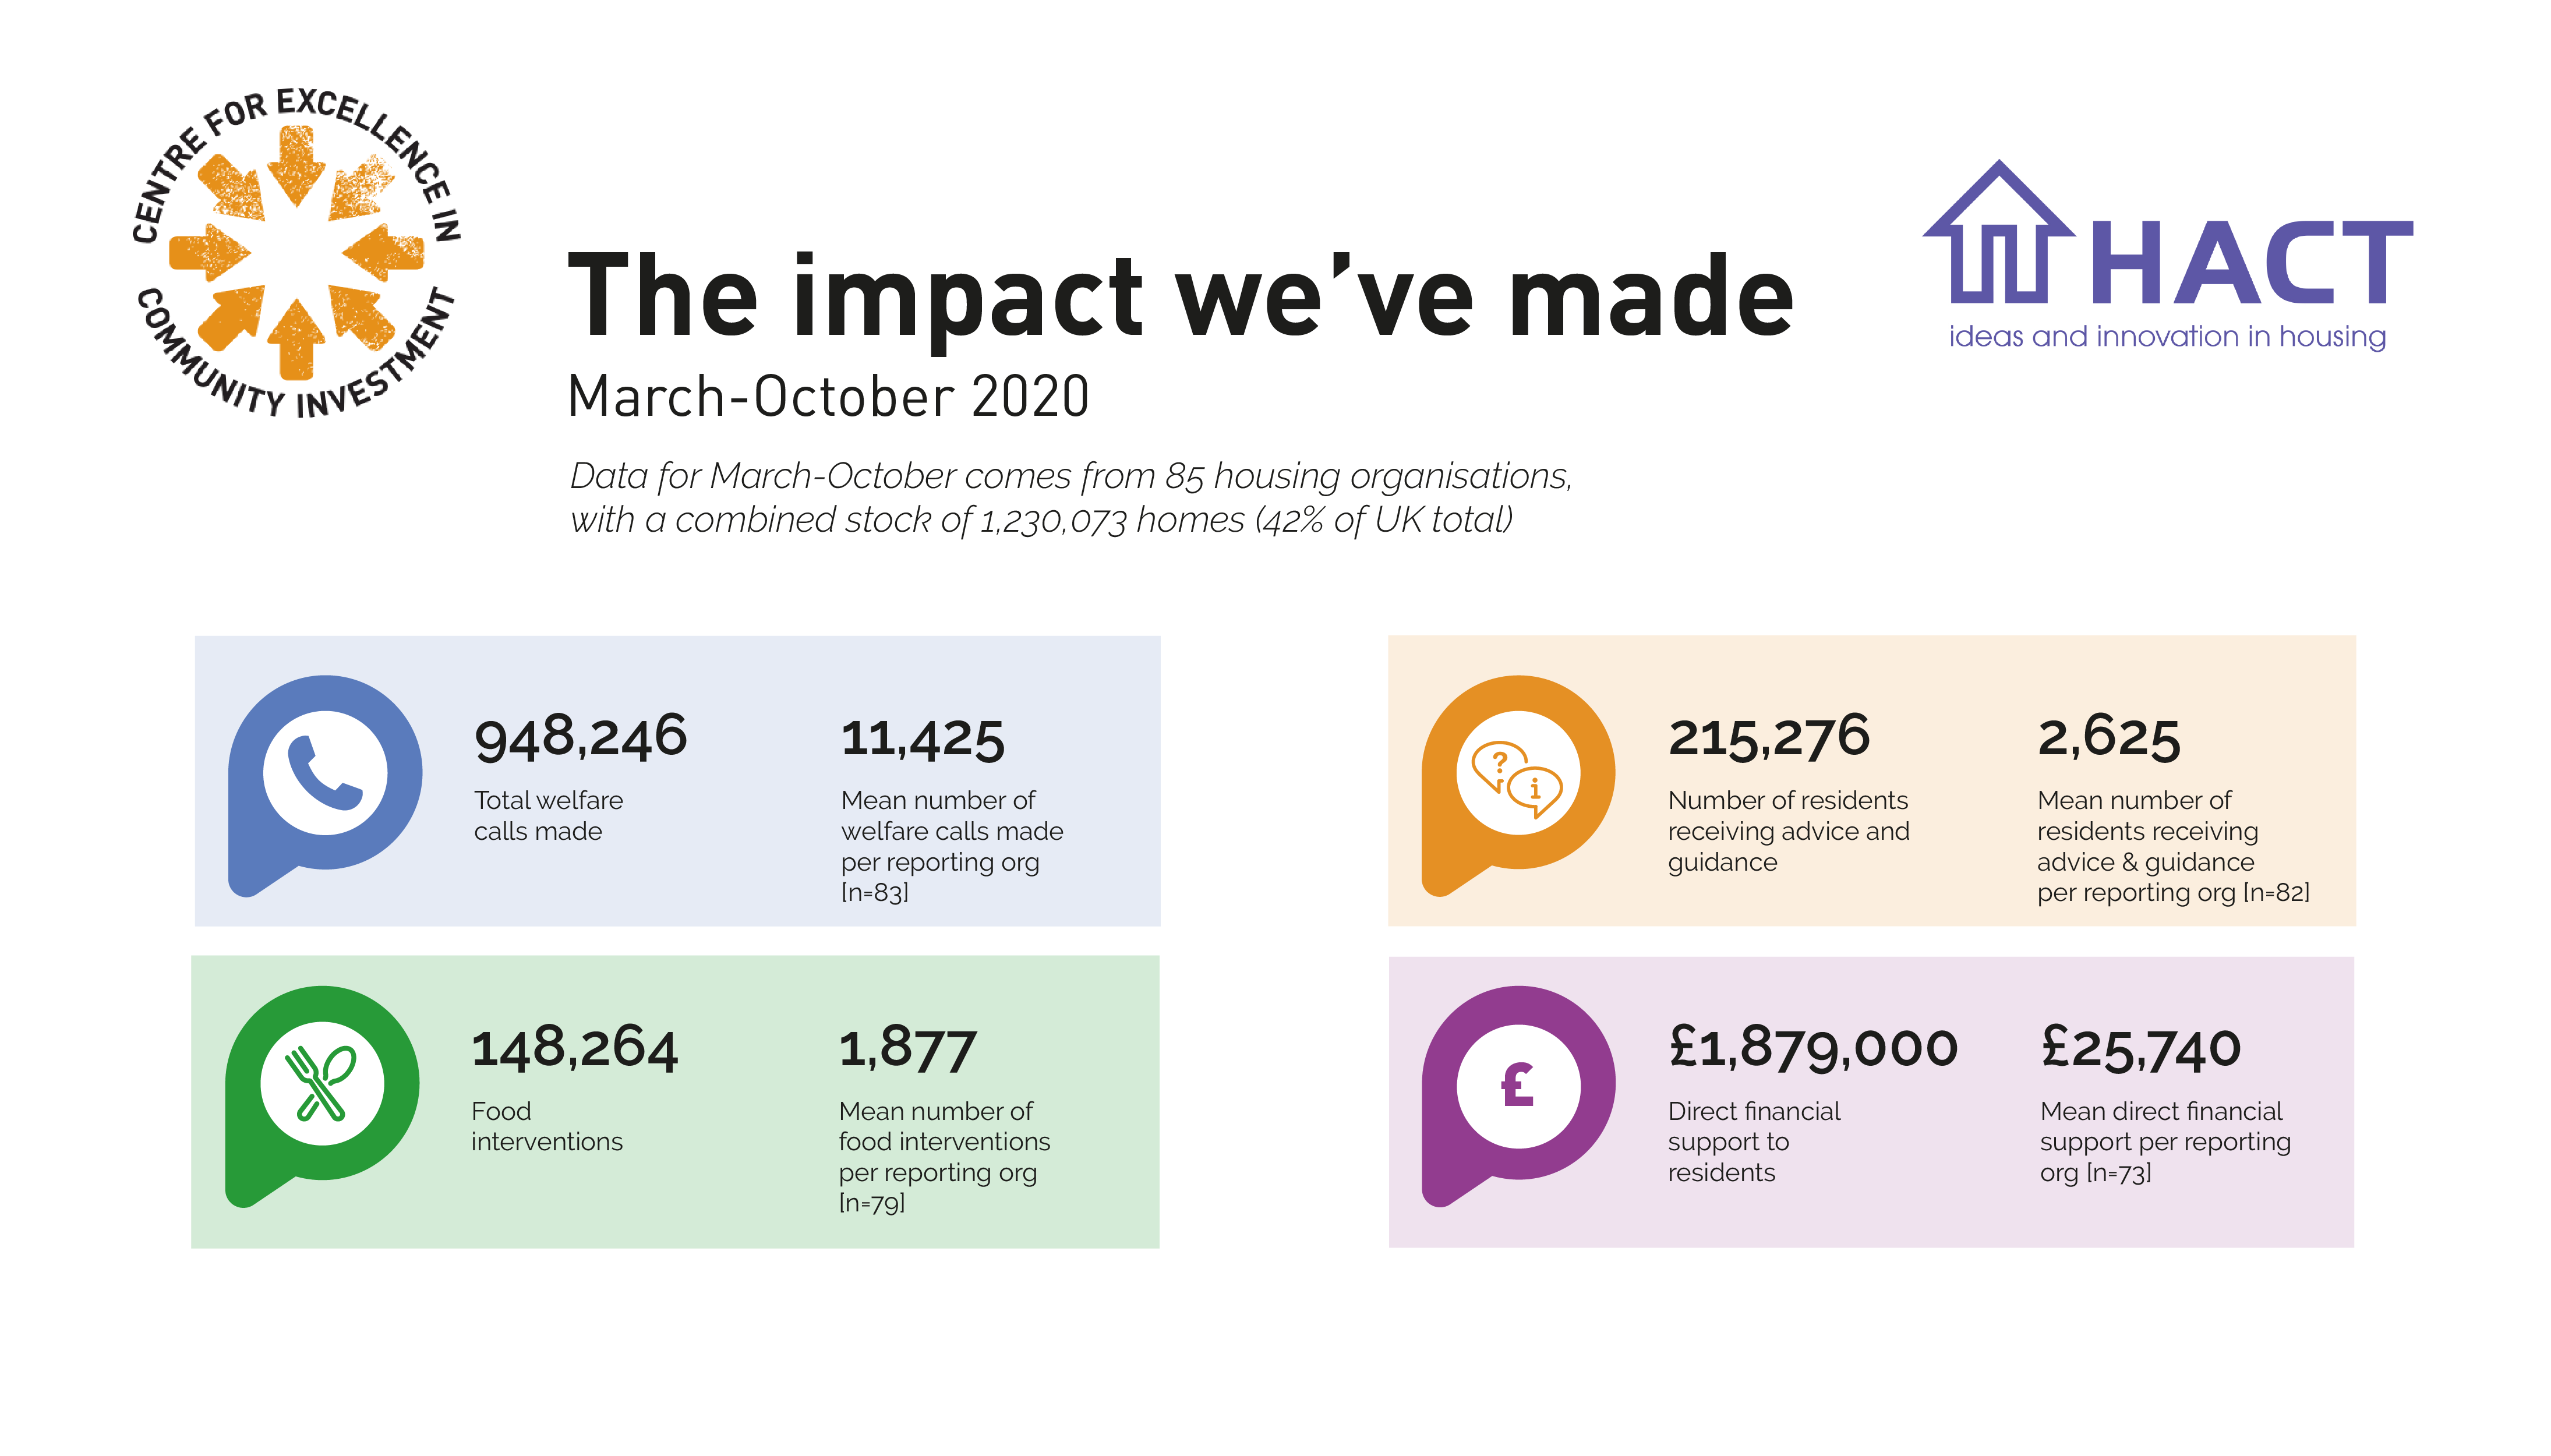 HACT measures housing sector's community impact since March